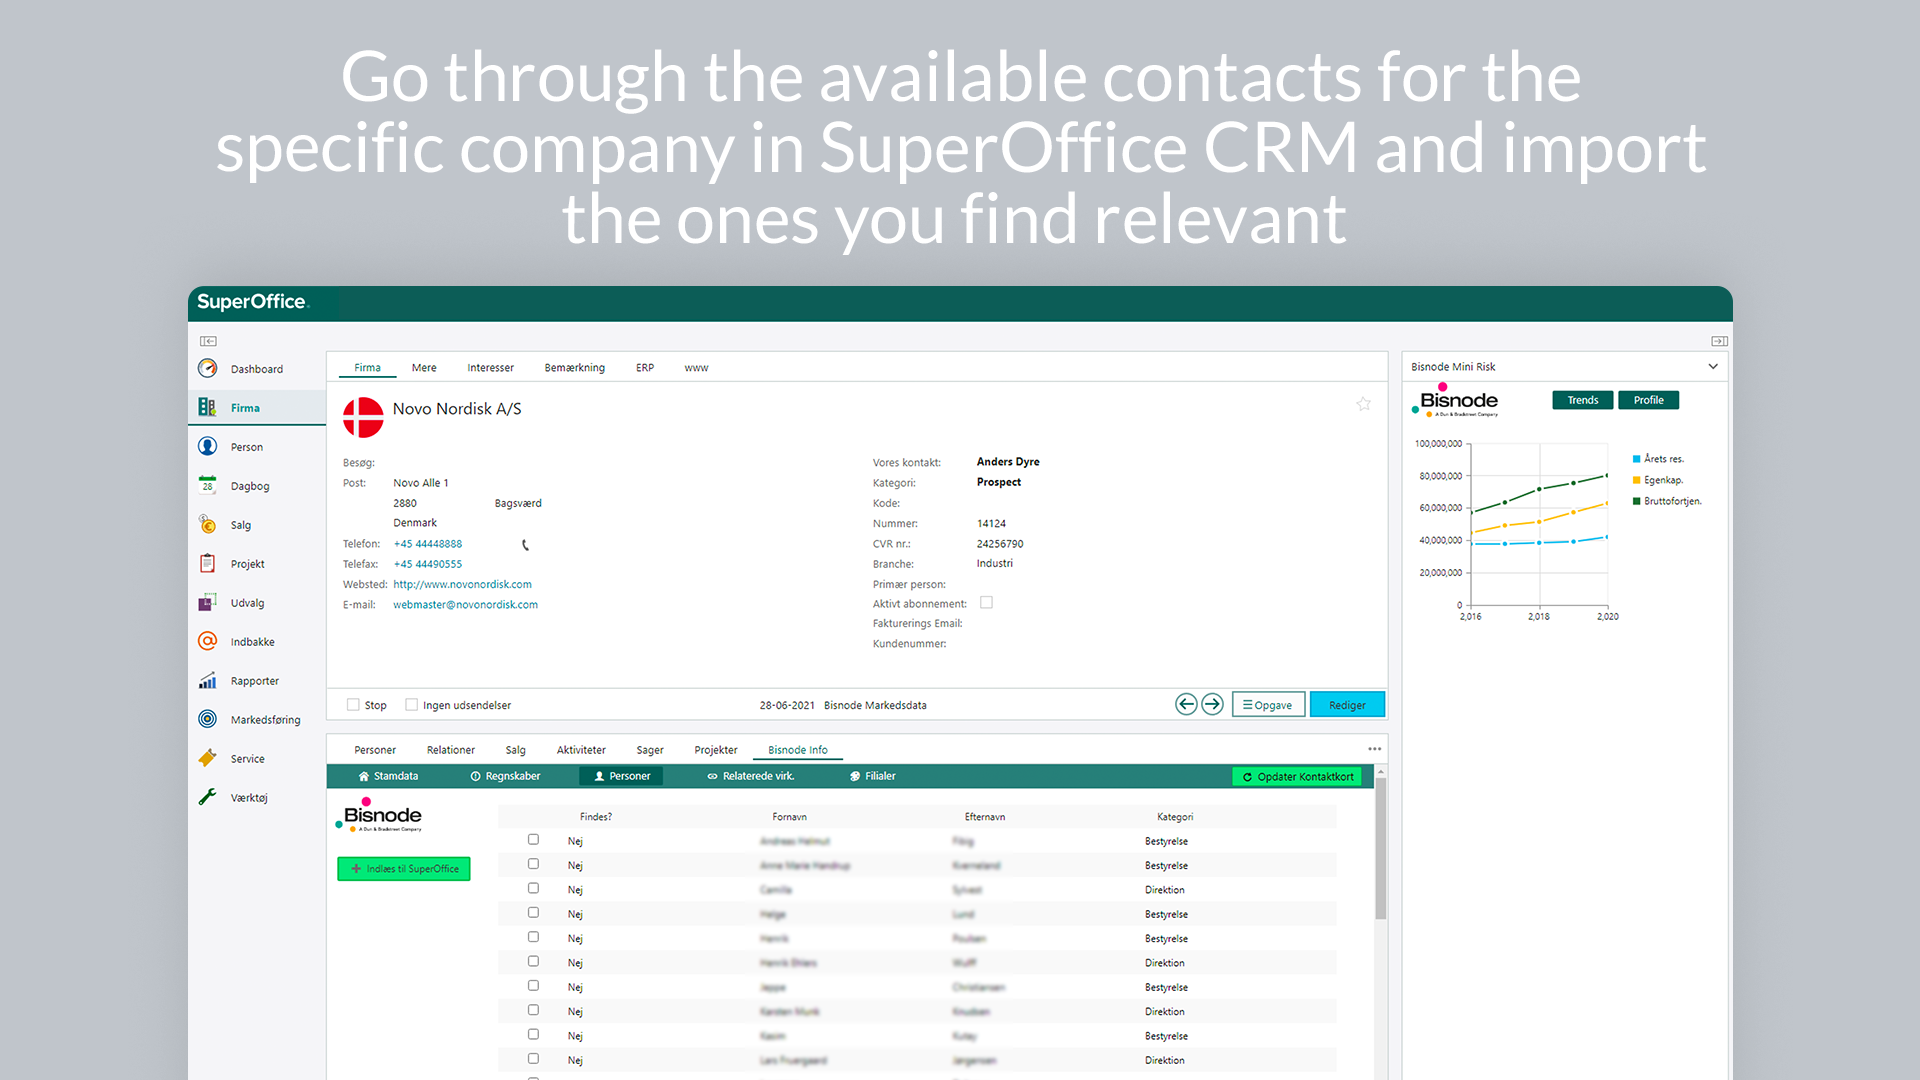 9 Go through the available contacts for the specific company in SuperOffice and import the ones you find relevant  .png